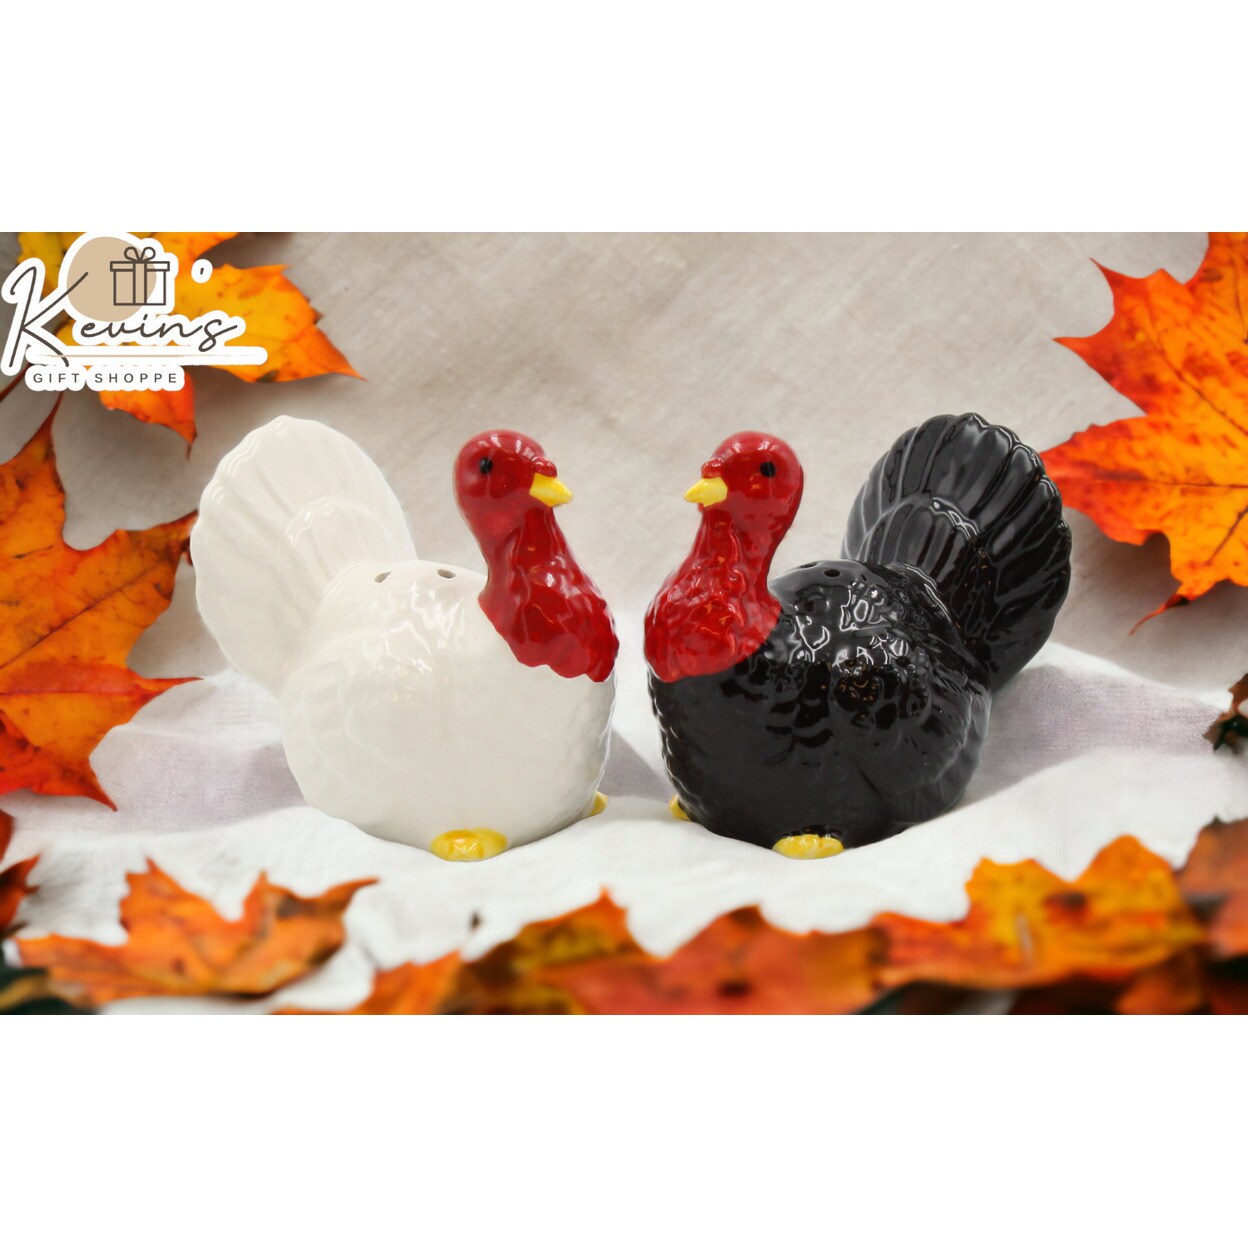 kevinsgiftshoppe Ceramic Thanksgiving Small White and Black Turkey Salt And Pepper Shakers Home Decor   Kitchen Decor Fall Decor